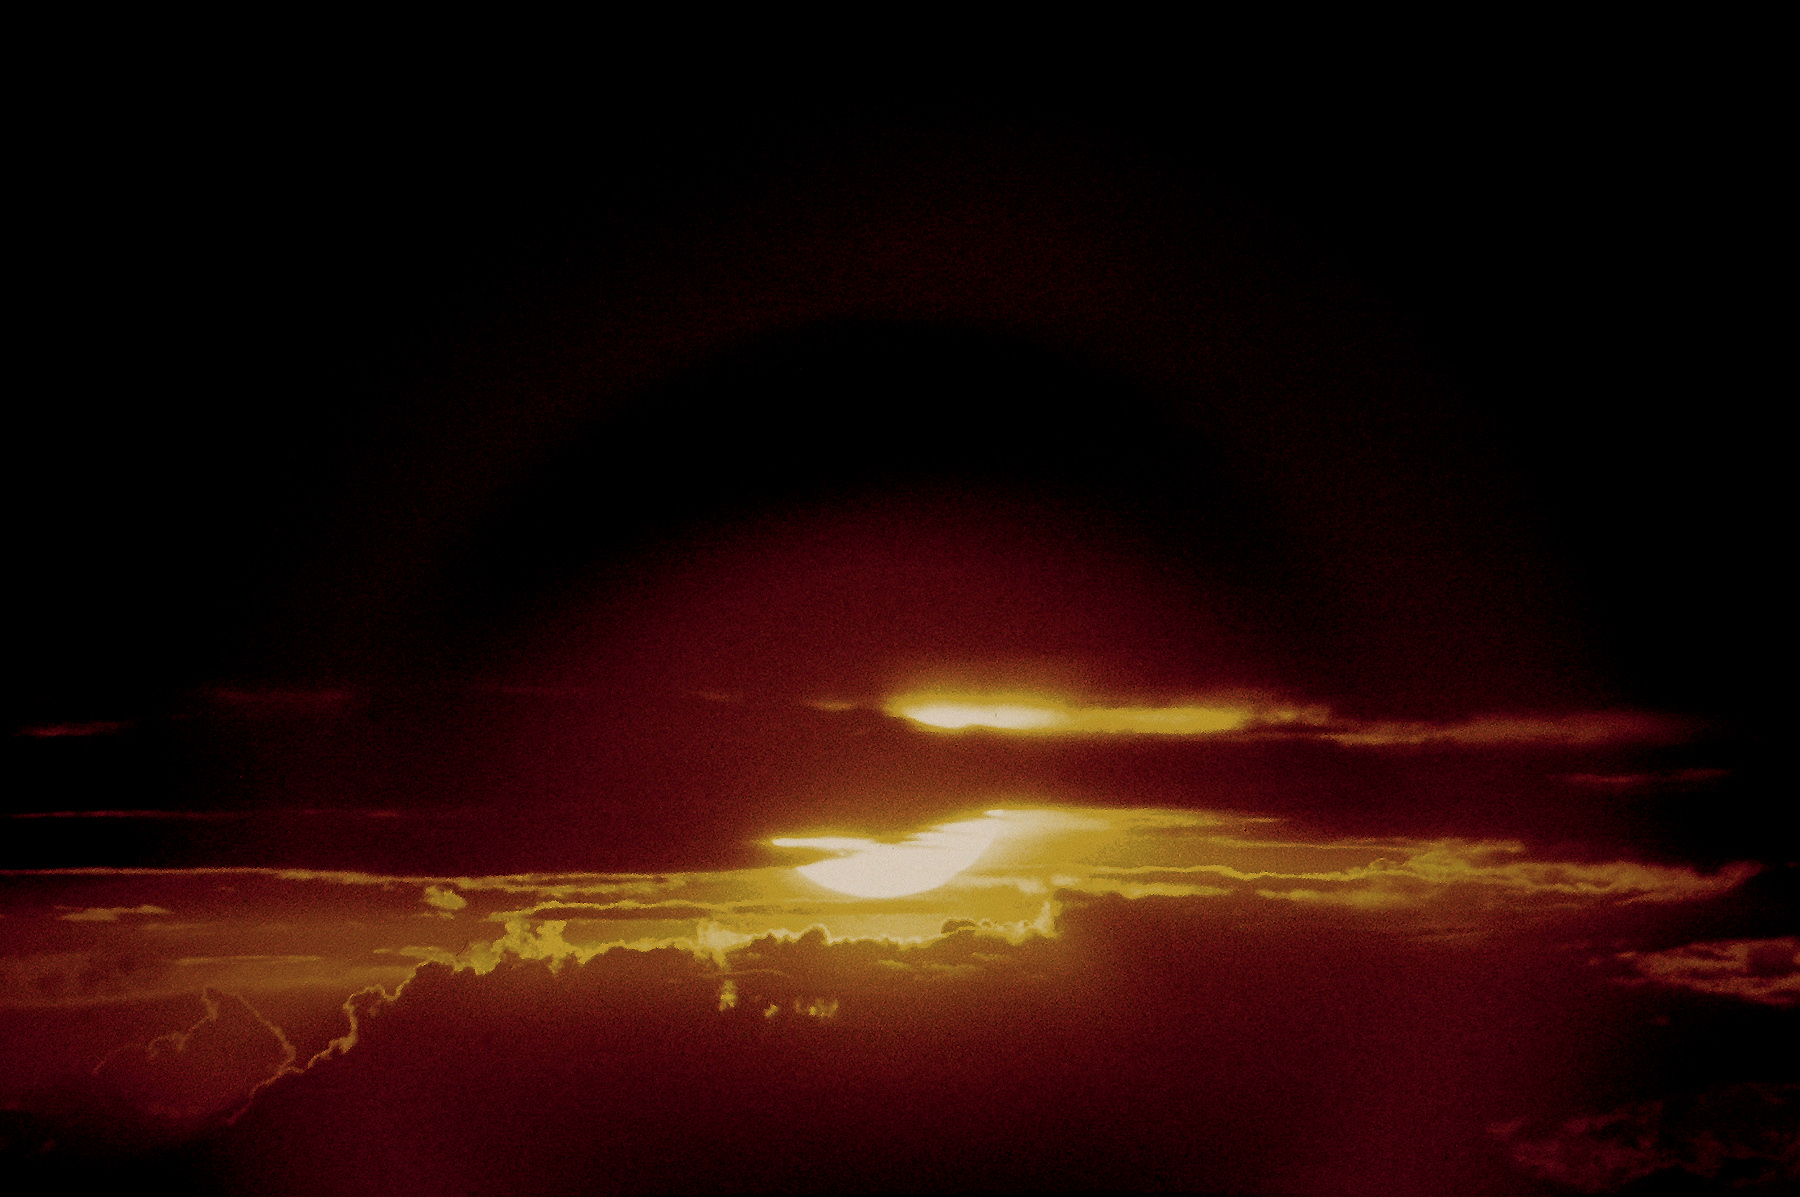 Eclipse 1973 - D38-Sunset at Sea - 5193